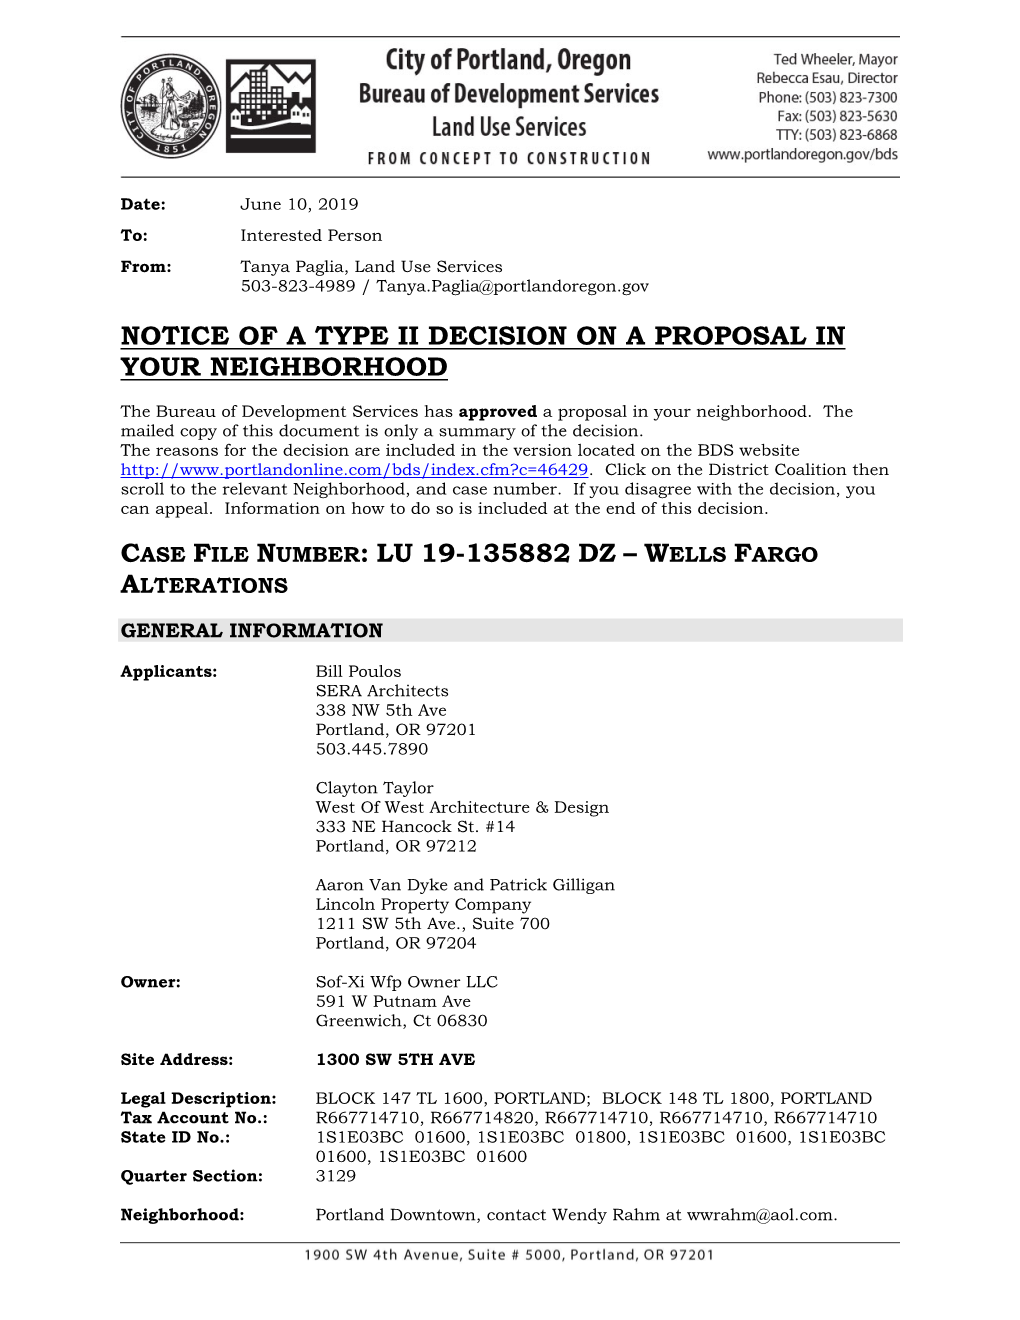 Notice of a Type Ii Decision on a Proposal in Your Neighborhood